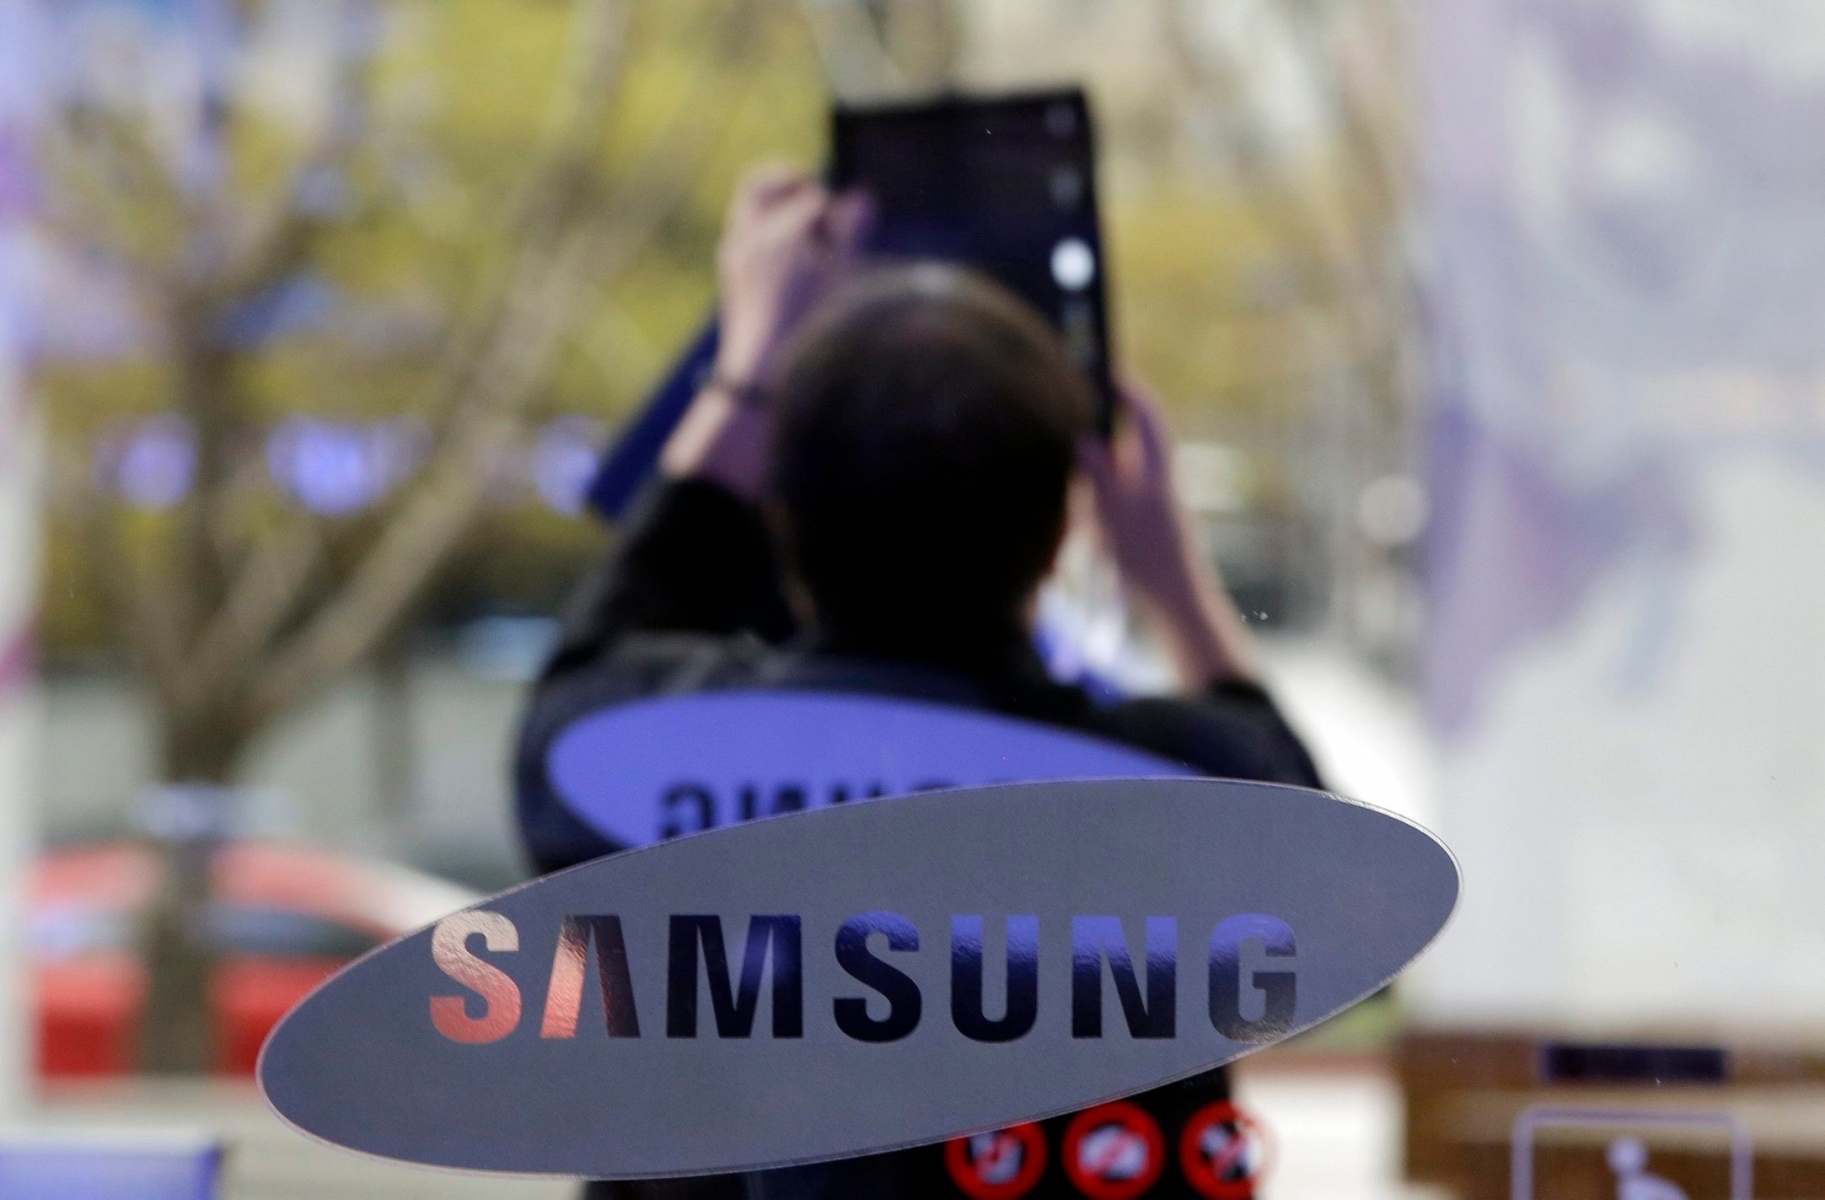 A visitor takes a picture near the logo of Samsung Electronics Co. outside its showroom in Seoul, South Korea, Tuesday, April 7, 2015. Samsung's quarterly operating earnings fell 31 percent from a year earlier but the drop wasn't as big as expected in a sign the smartphone and computer chip giant may be emerging from its profit slump. (AP Photo/Lee Jin-man) South Korea Earns Samsung Electronics